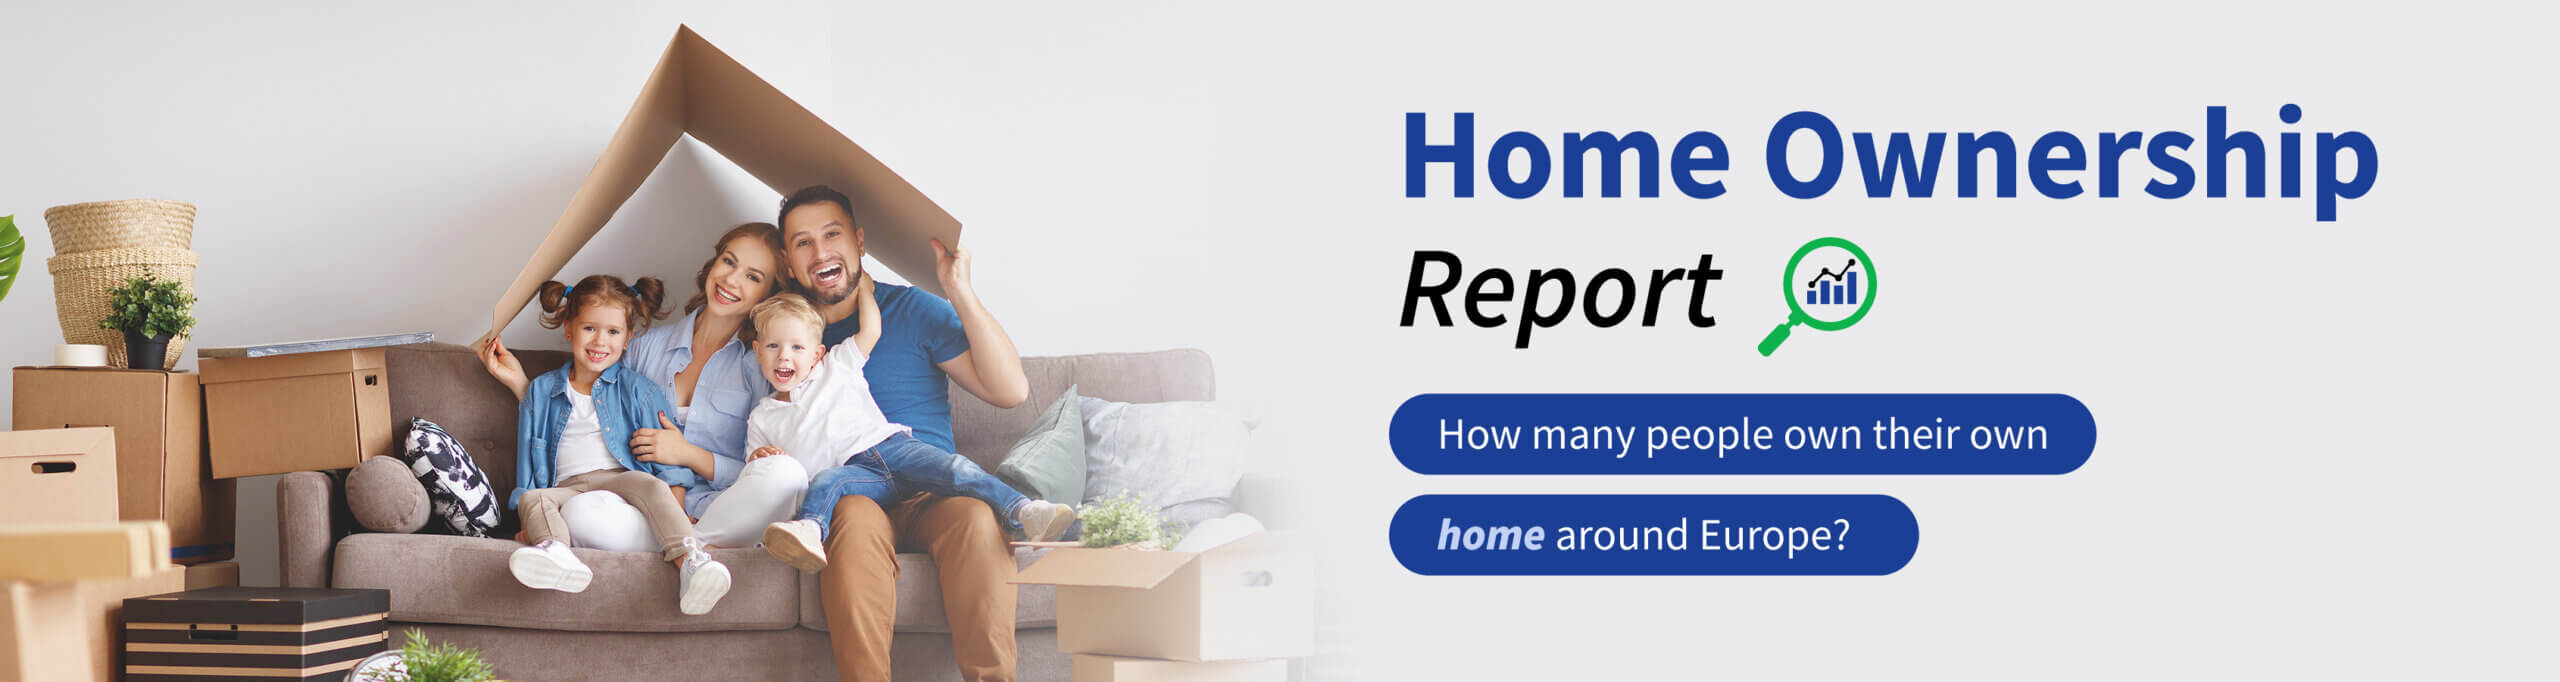 Home Ownership Report